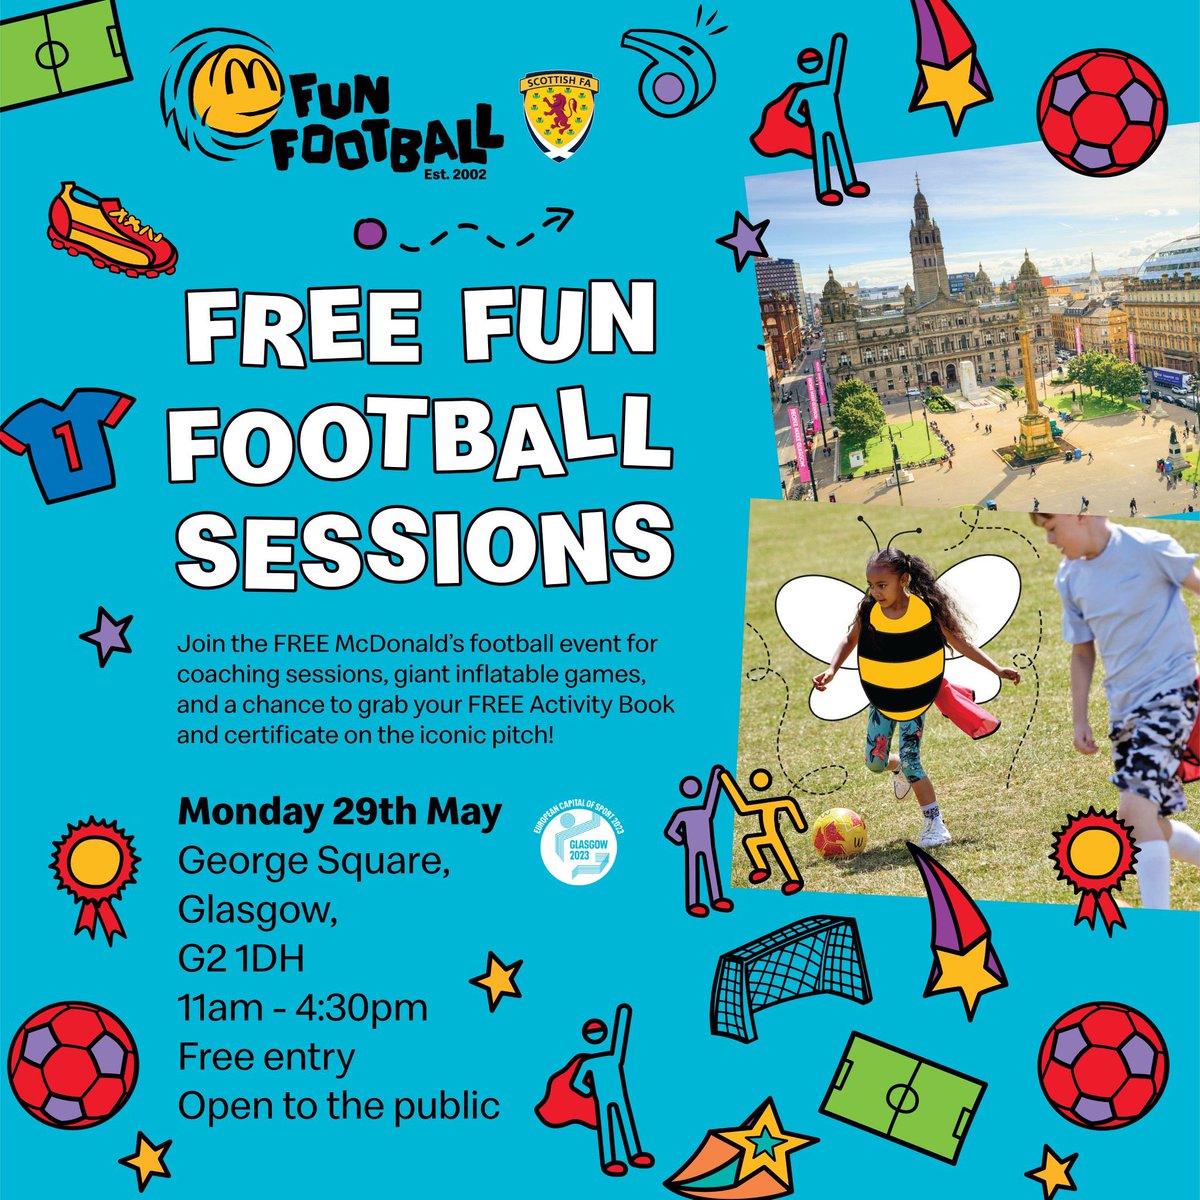 ☀️ The sun is out and the free @FunFootballUK sessions are ready to go in Glasgow’s George Square. Come down between 11am and 4.30pm today to take part in the Big Kickabout event ⚽️